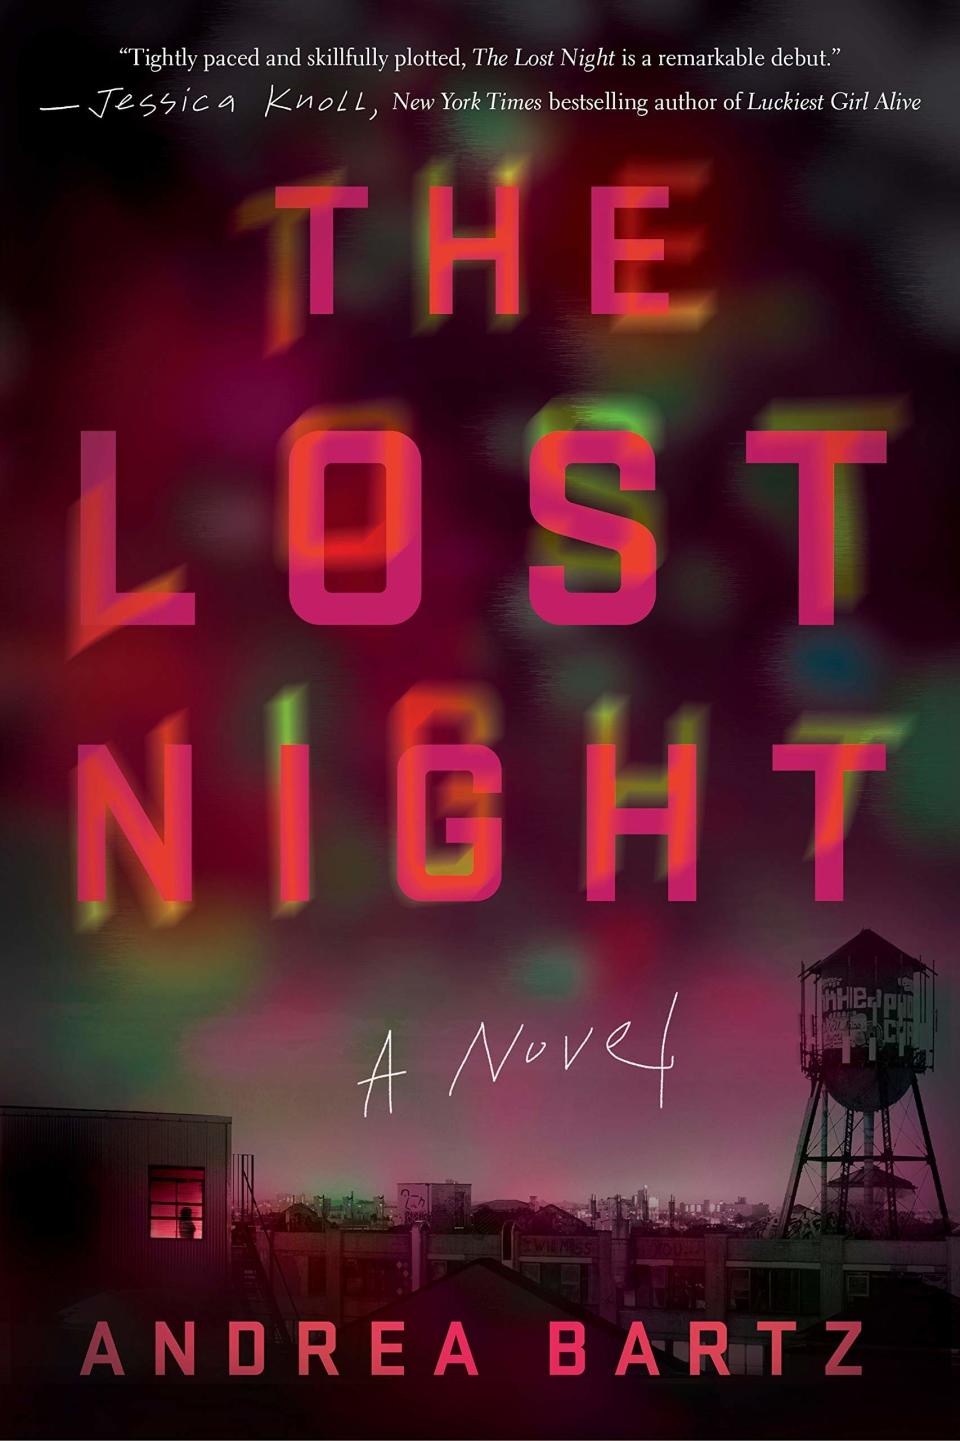 If you couldn't get enough of TBS's <em>Search Party,</em> or more recently Netflix's <em>Russian Doll,</em> pick up a copy of <em>The Lost Night.</em> Much like these two shows, this book also centers on a young woman posing as an amateur detective to solve a murder. Back in 2009 the novel's protagonist, Lindsay, partied with her friends and the queen bee of their group, Edie. After a long night of binge drinking, Lindsay woke up to find Edie dead of an apparent suicide. Now, a decade later, Lindsay discovers new evidence that could prove that Edie was murdered—and that Lindsay might have been involved. The rest of this haunting debut follows Lindsay as she tries to piece together what really happened on that awful, forgotten night.